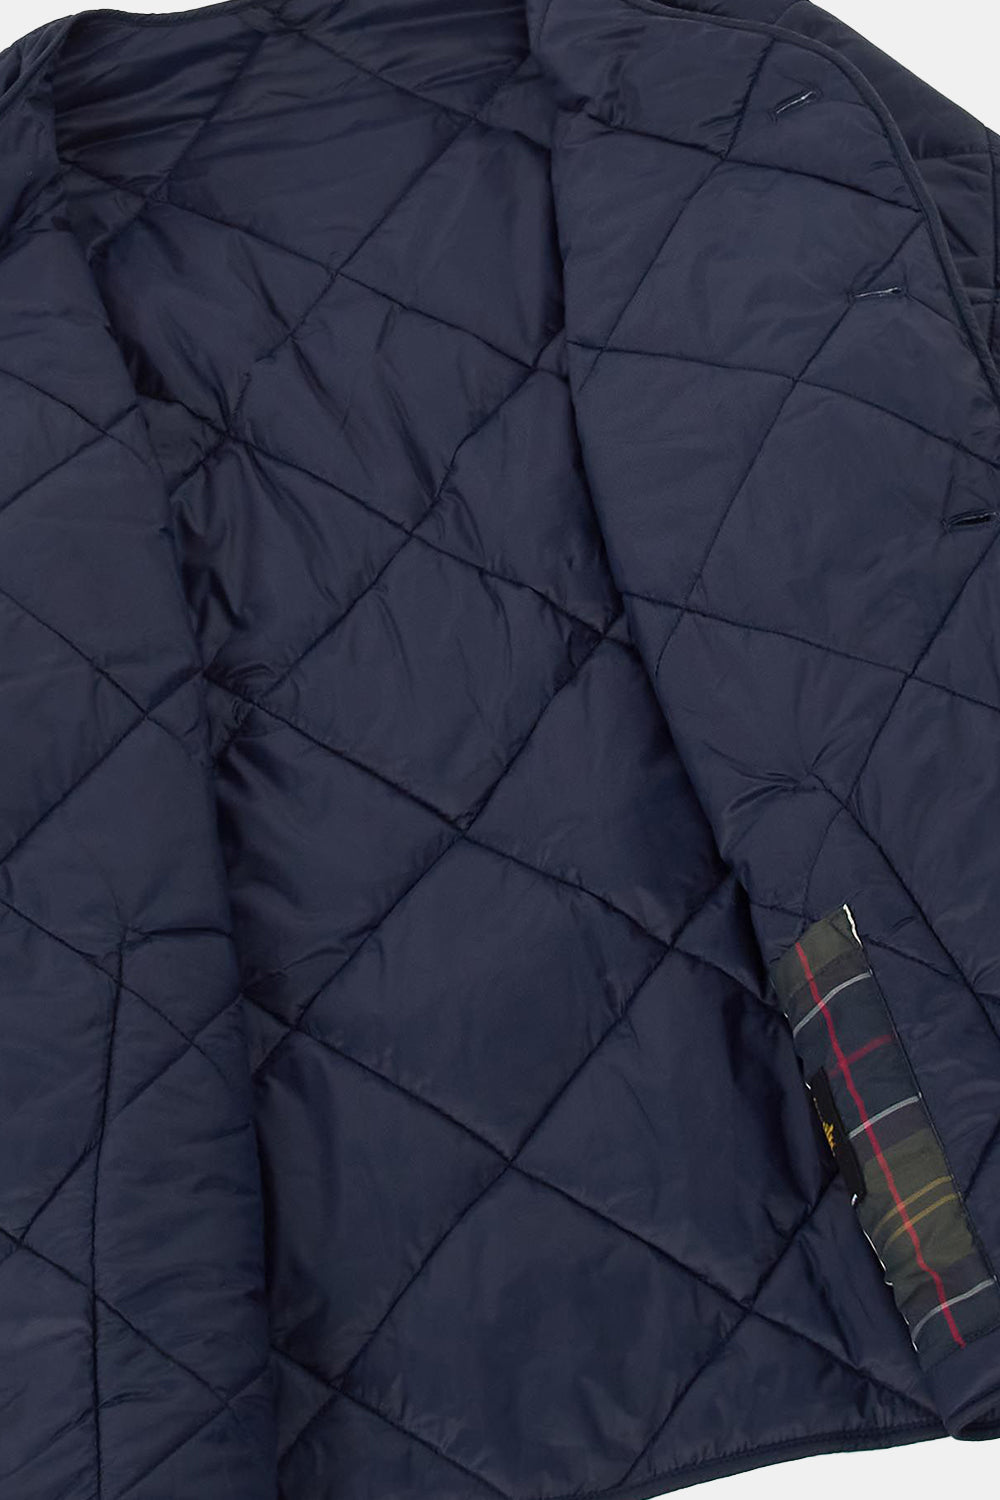 Barbour Liddesdale Quilted Cardigan Jacket (Navy)